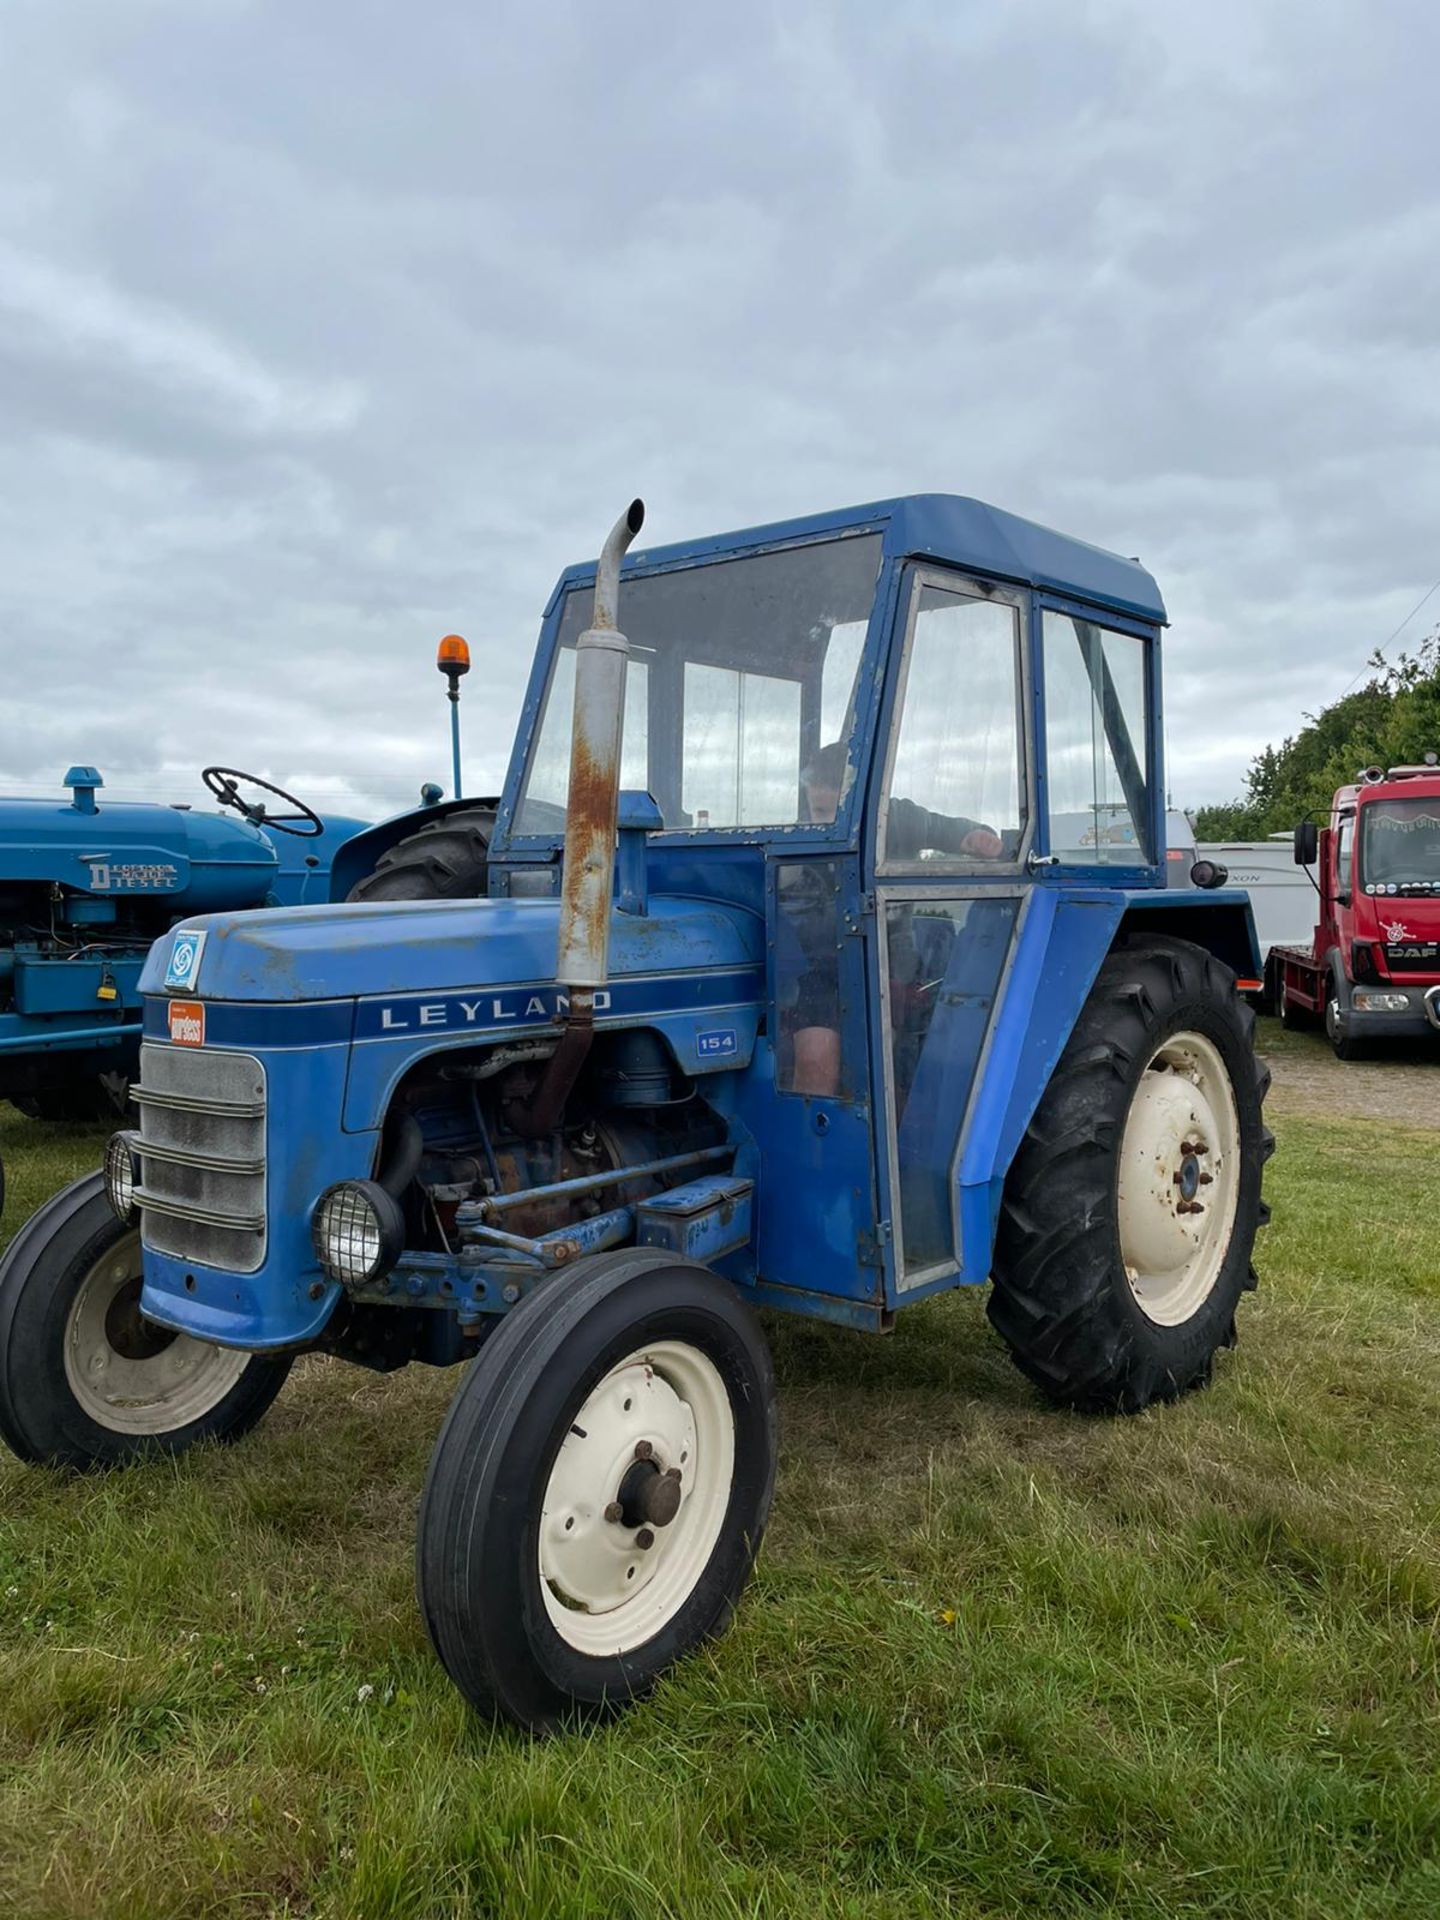 LAYLAND 154 TRACTOR